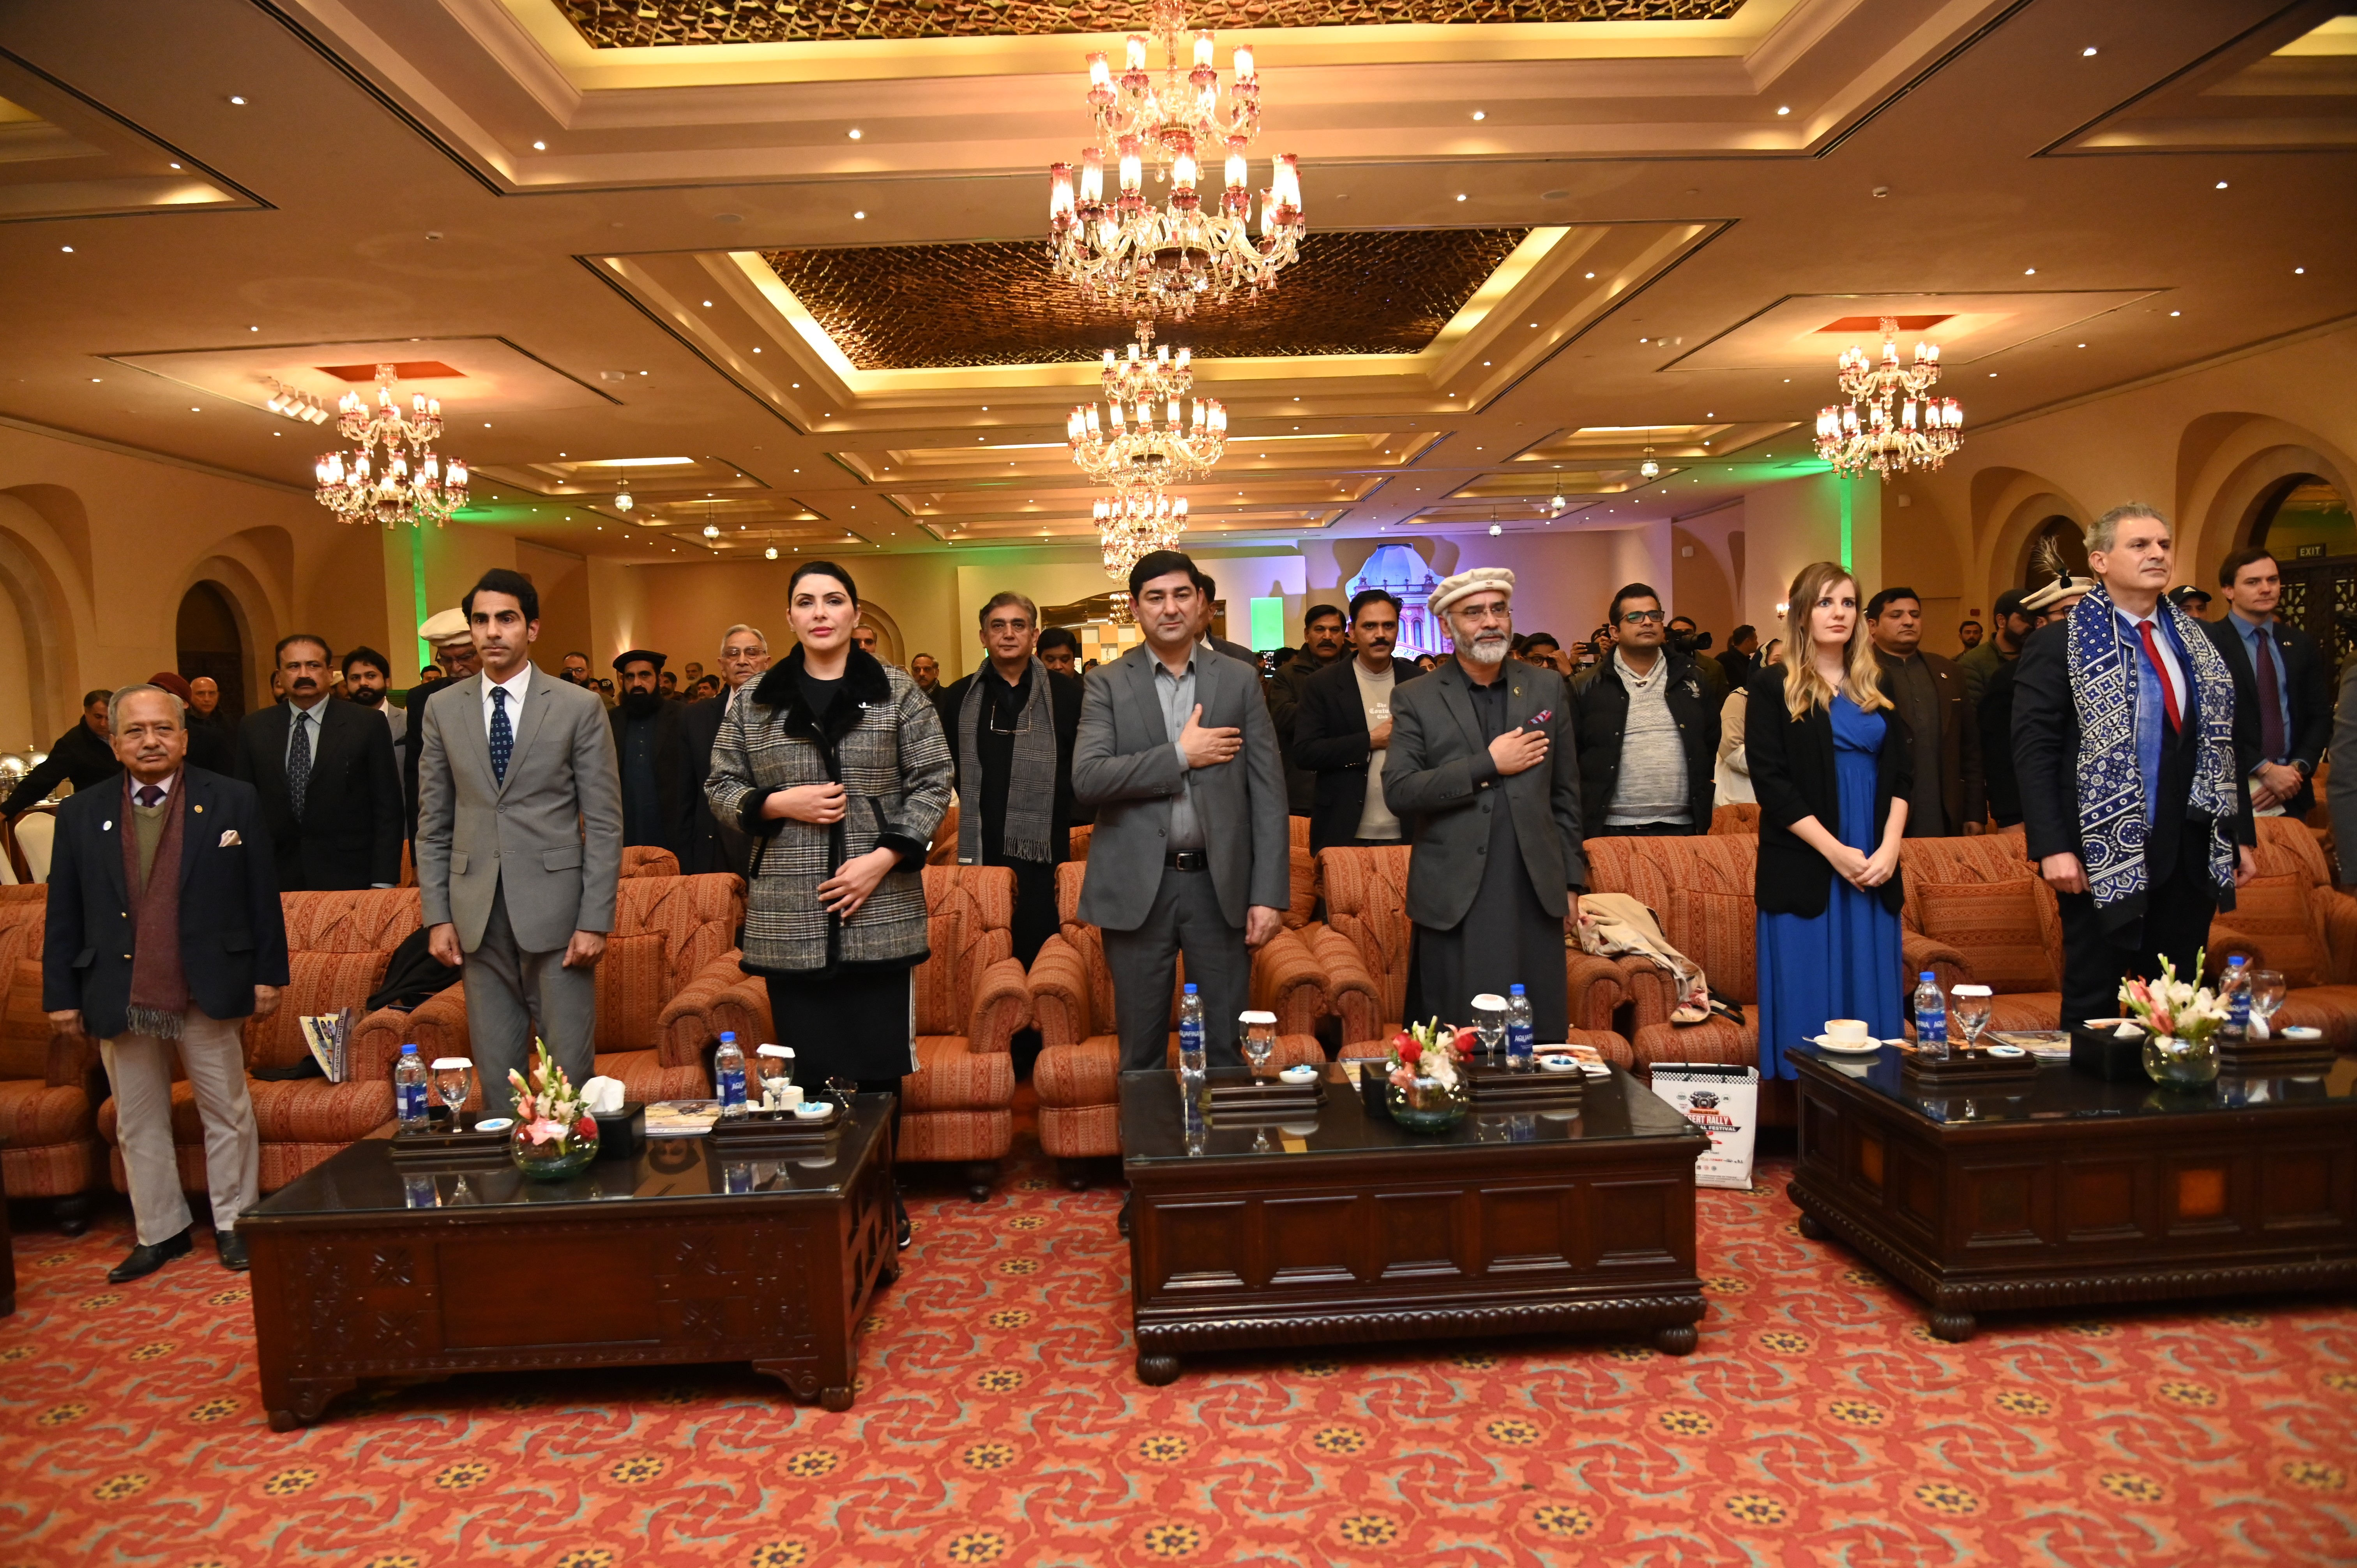 The participants standing in honor of The National Anthem of Pakistan